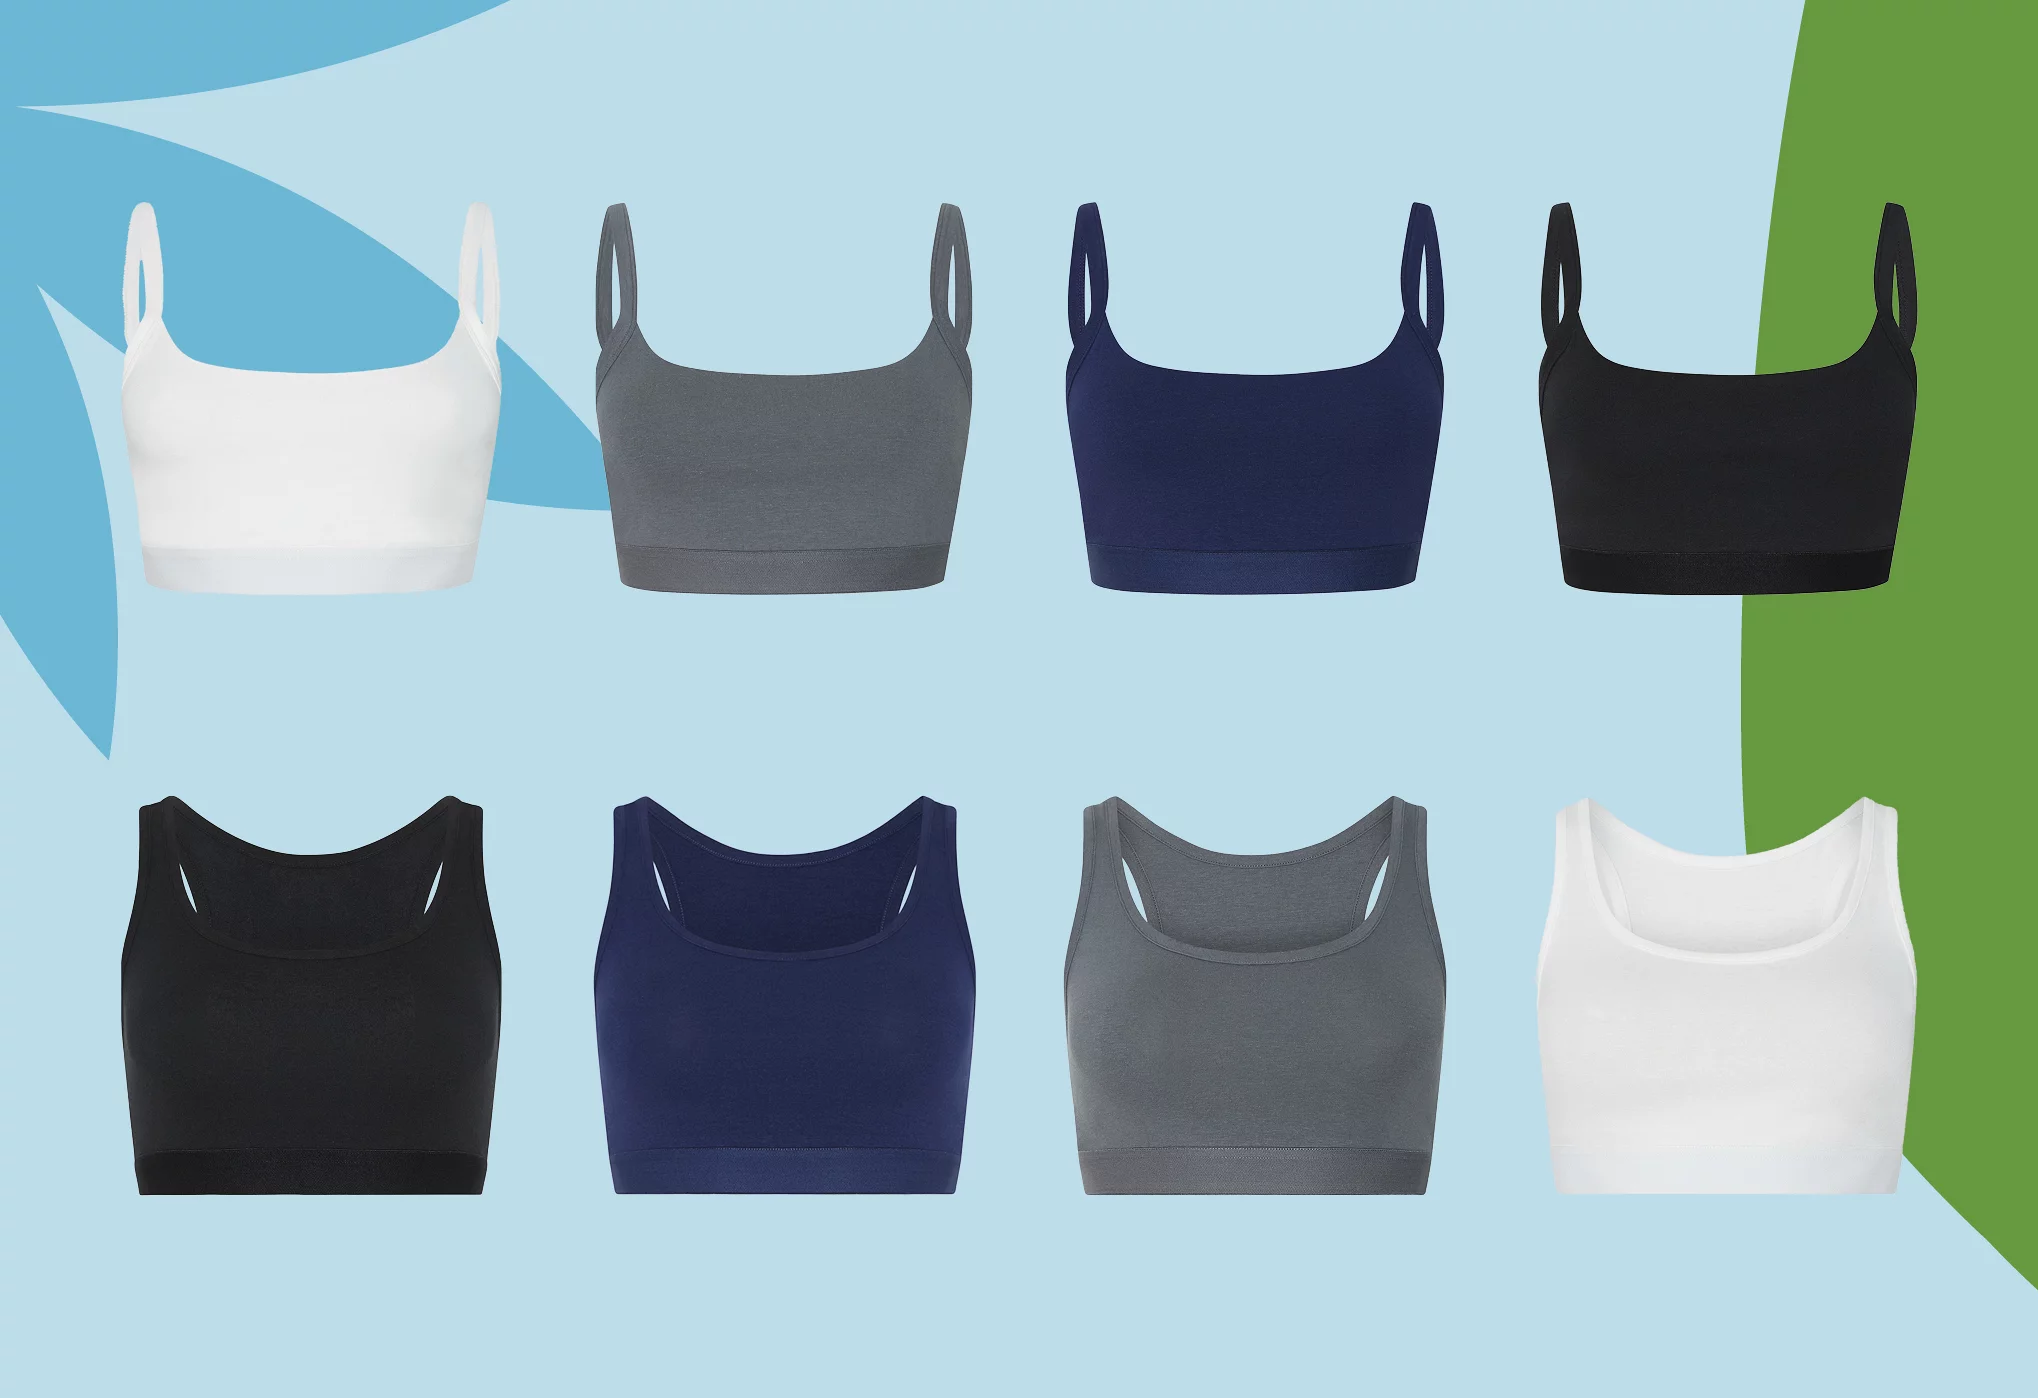 New bras for sport & everyday life
Discover our new bras made from organic cotton and hemp. They are thermo-regulating, breathable and moisture-wicking. A soft elasticated underbust band ensures good support and comfort. Available in four great colours!